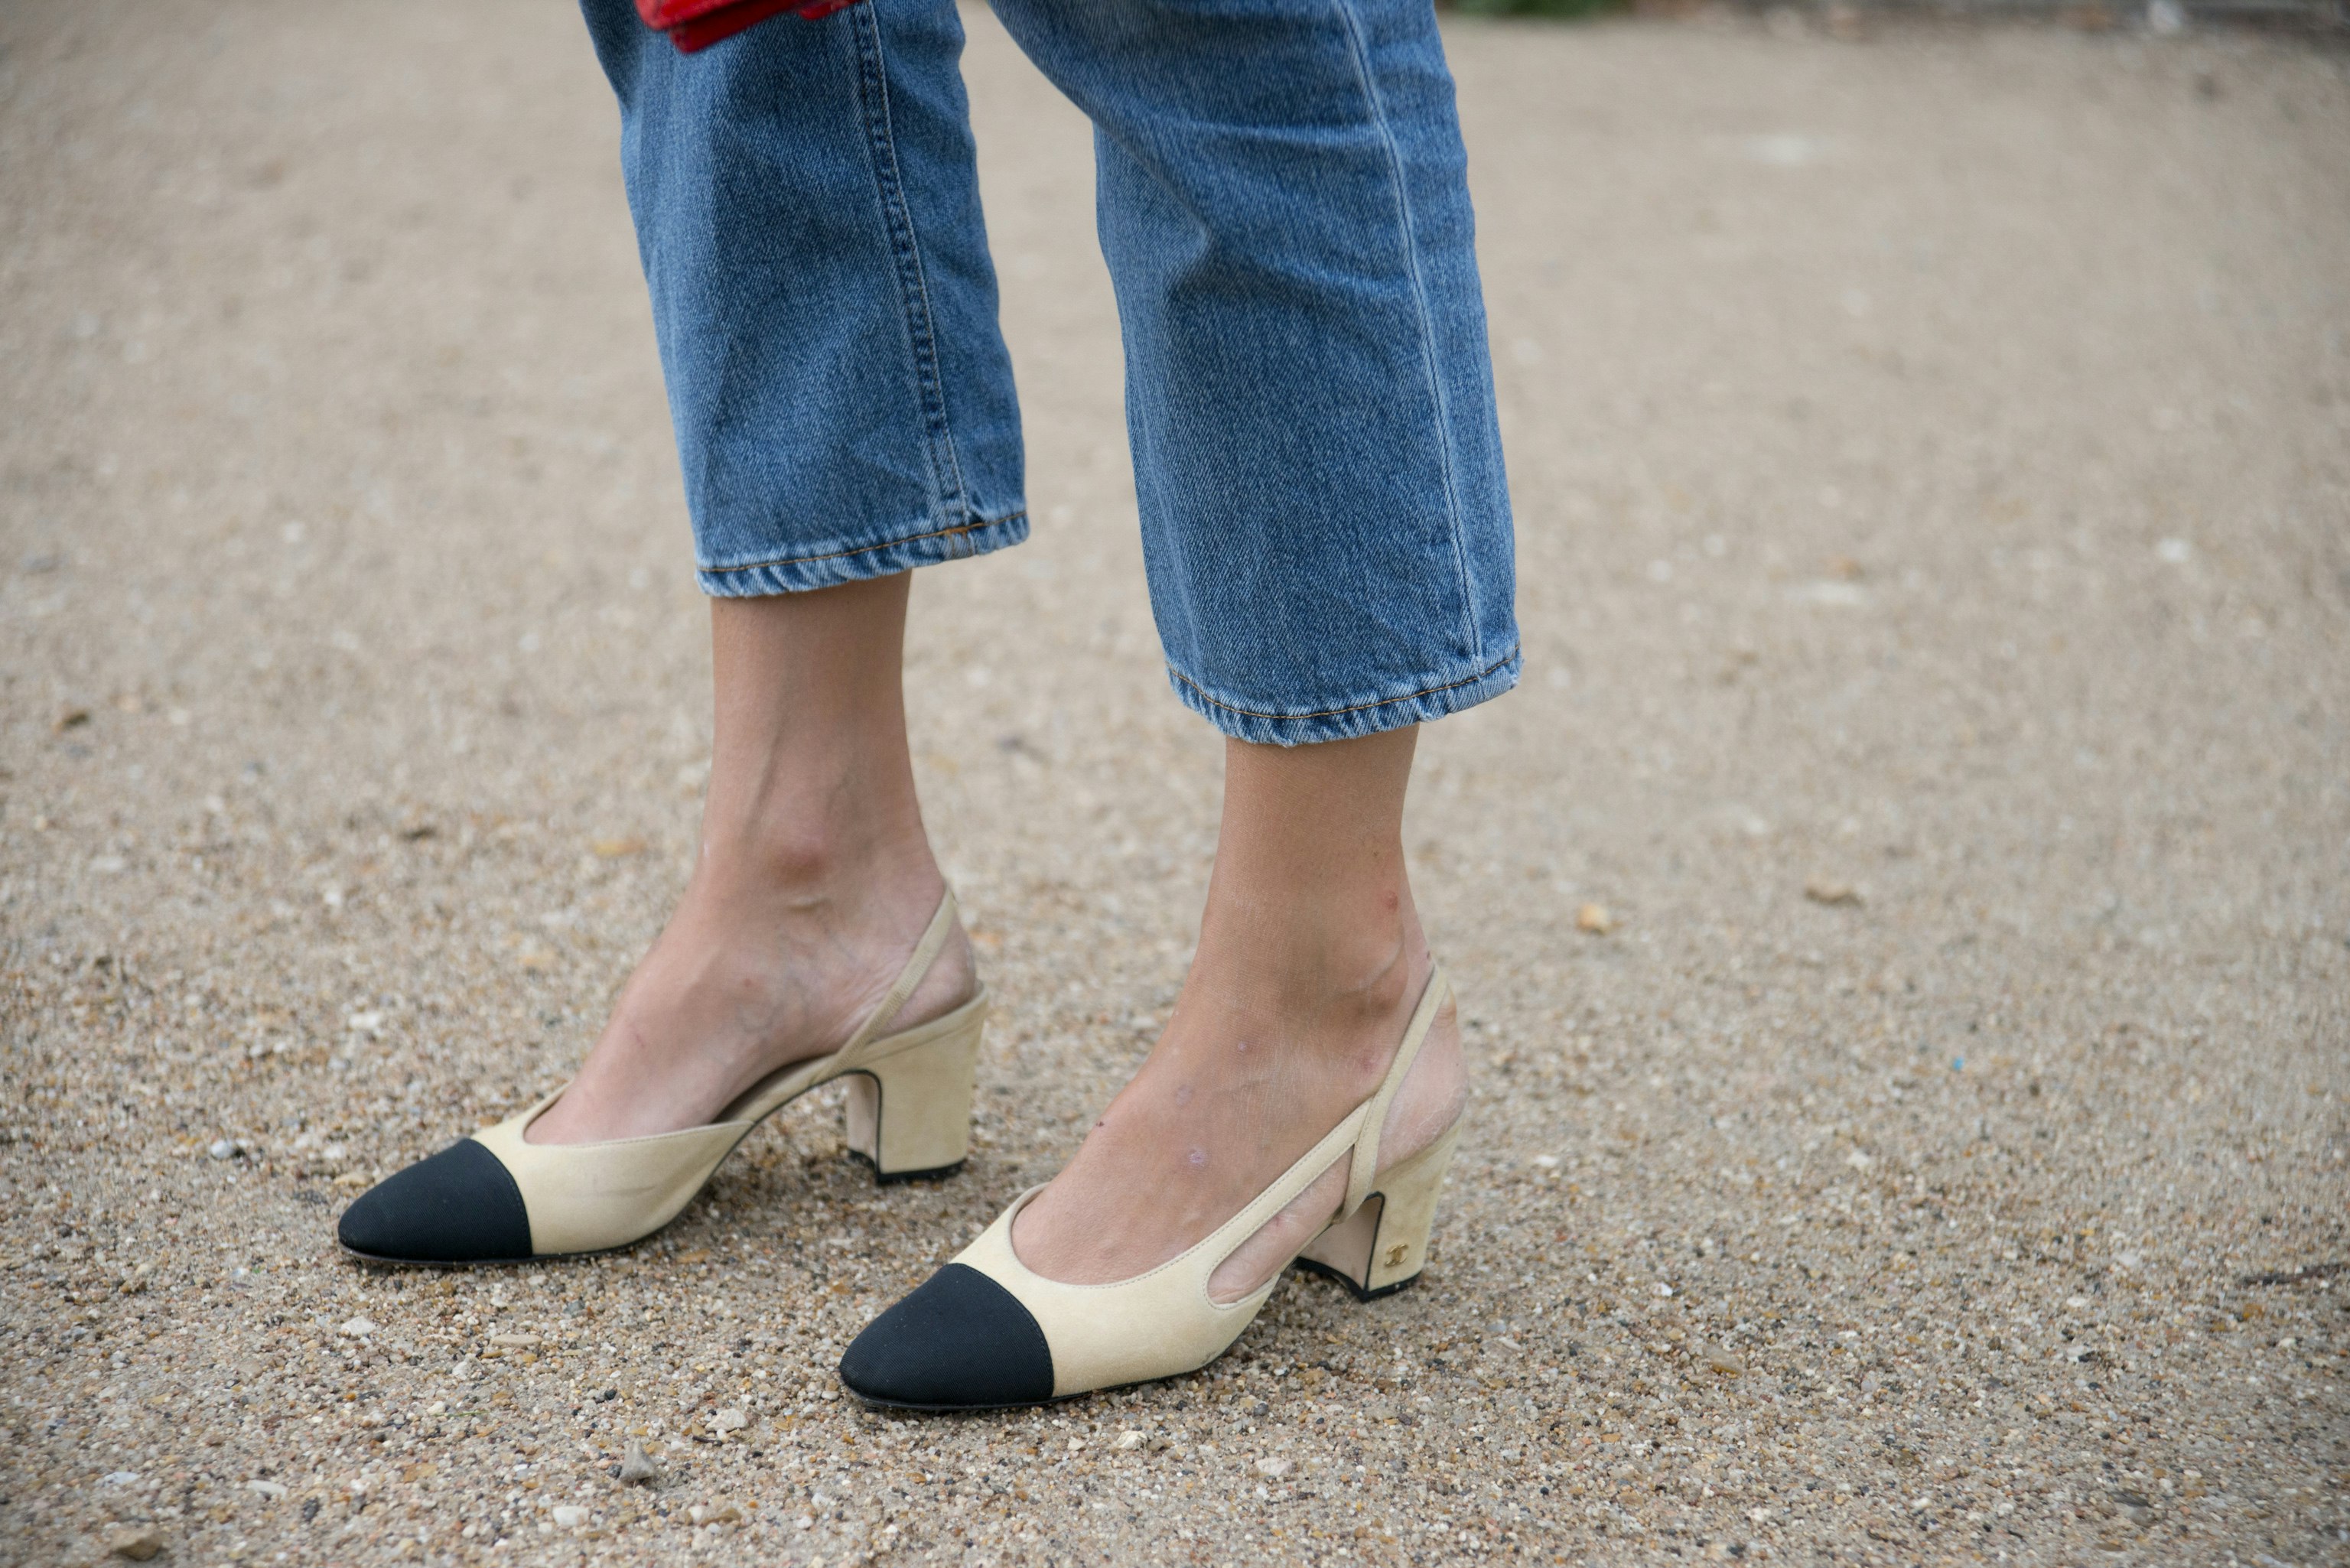 Chanel Slingbacks: Why They Will Always Be a Classic